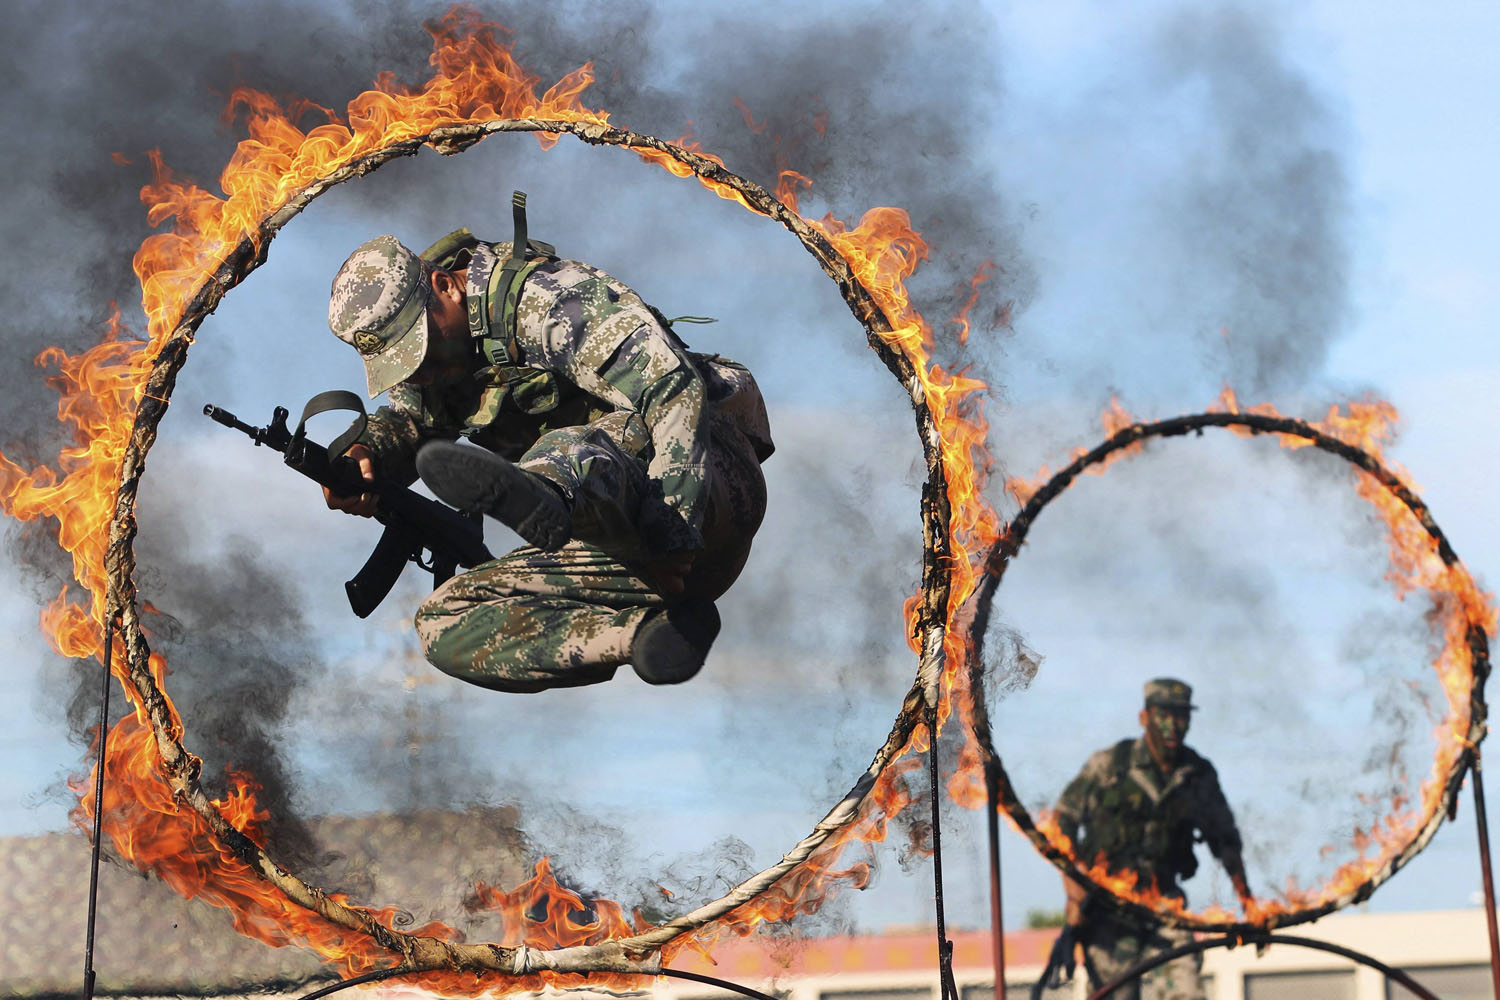 A soldier from the People's Liberation Army jumps through a ring of fire as part of training during the PLA Army Day in Wenzhou